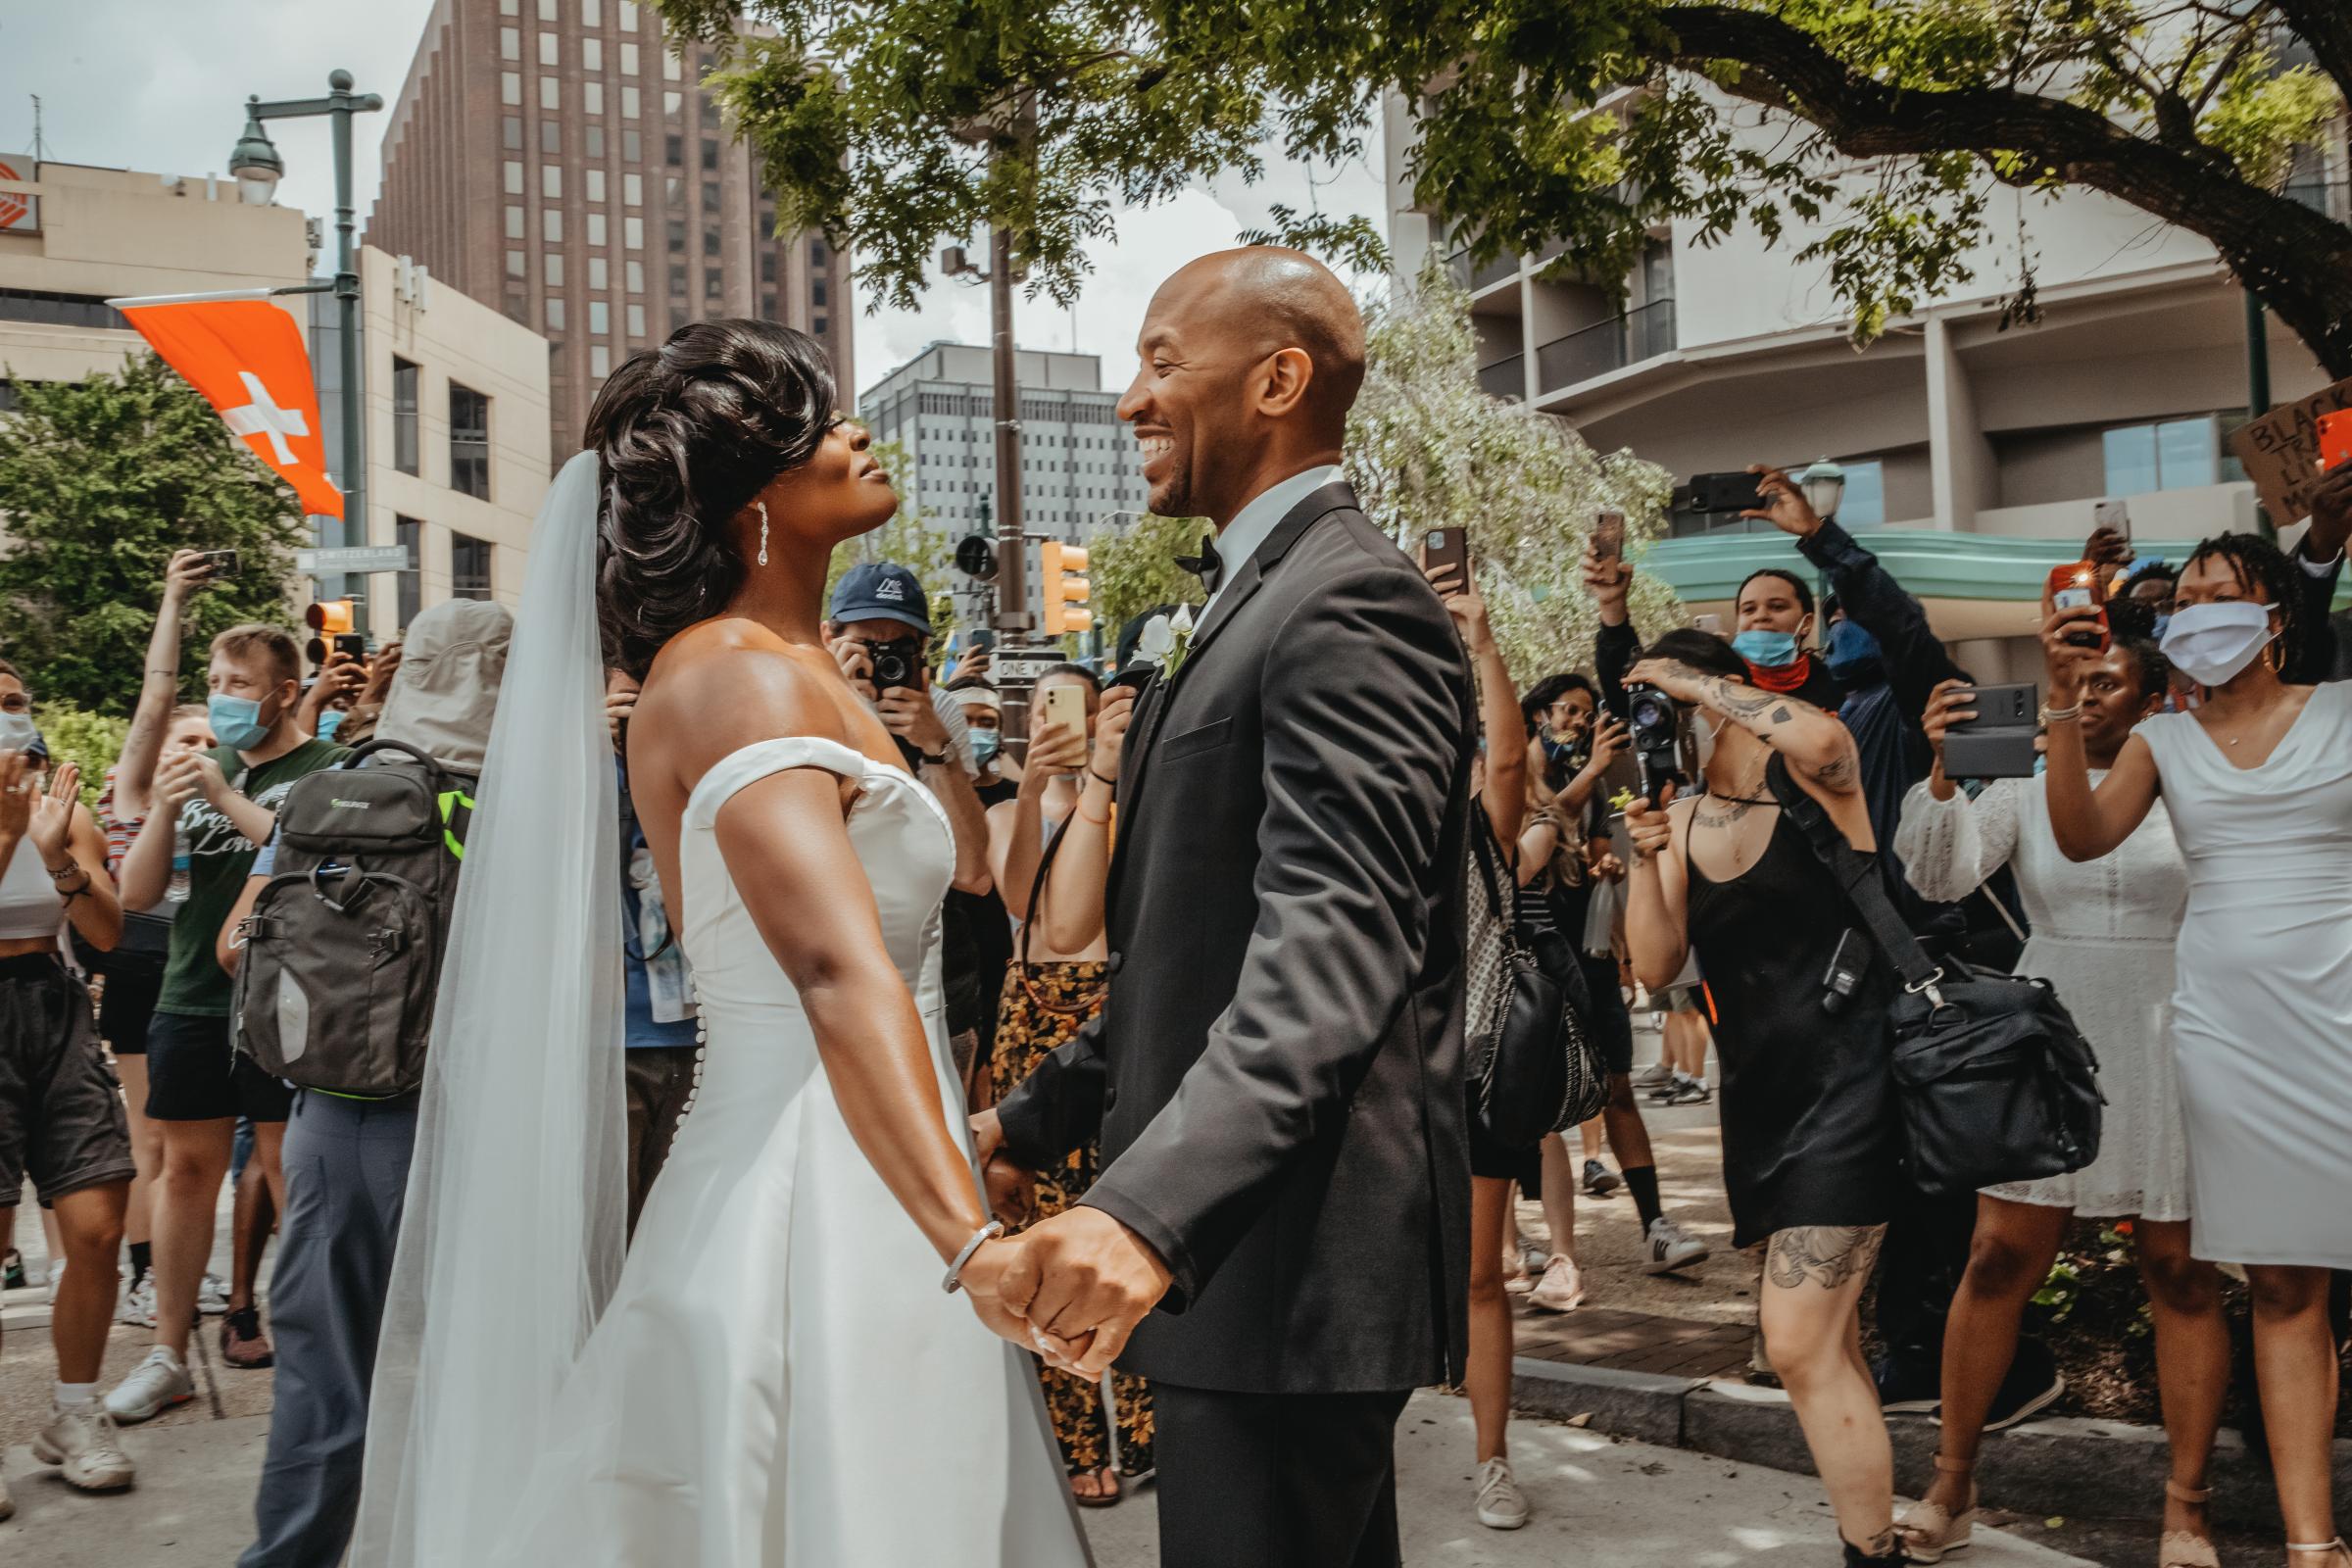 Kerry Anne and Michael Gordon join a Black Lives Matter protest taking place alongside their wedding ceremony at The Logan hotel in Philadelphia on June 6, 2020.